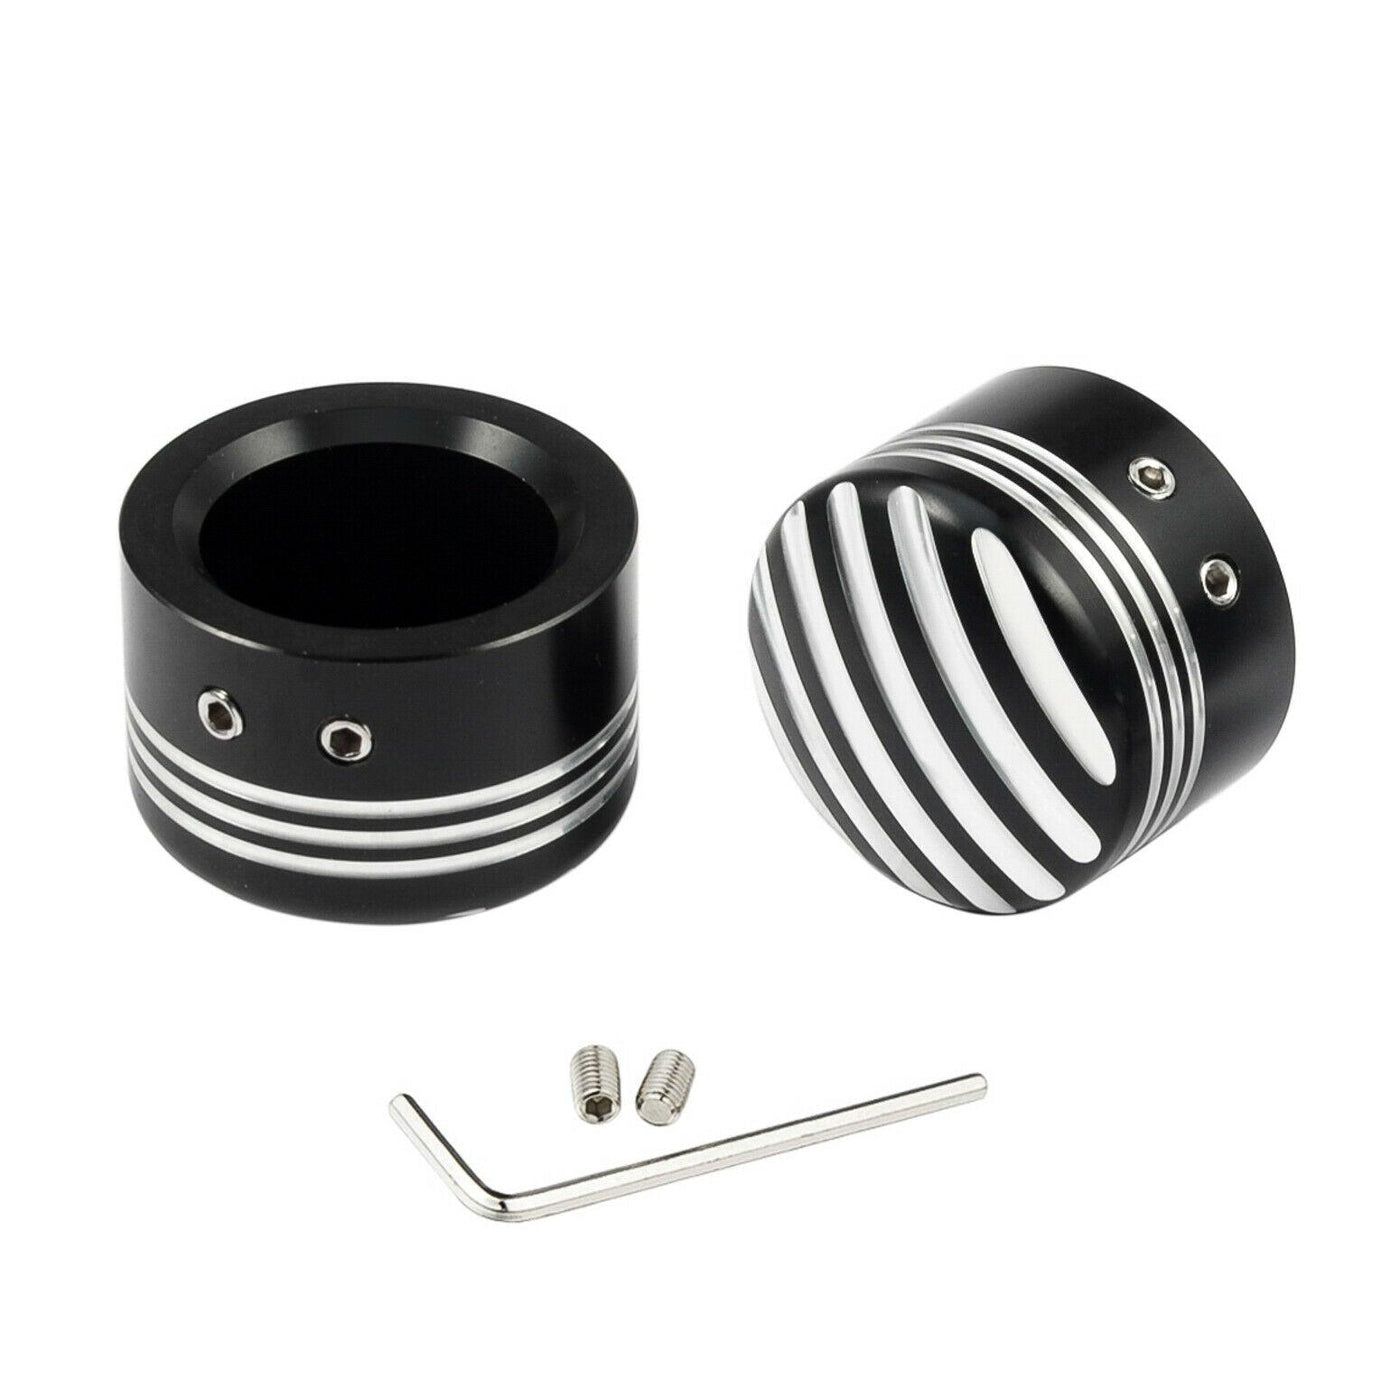 Black Front Axle Cap Nut Cover Fit For Harley Sportster XL883 Road Electra Glide - Moto Life Products